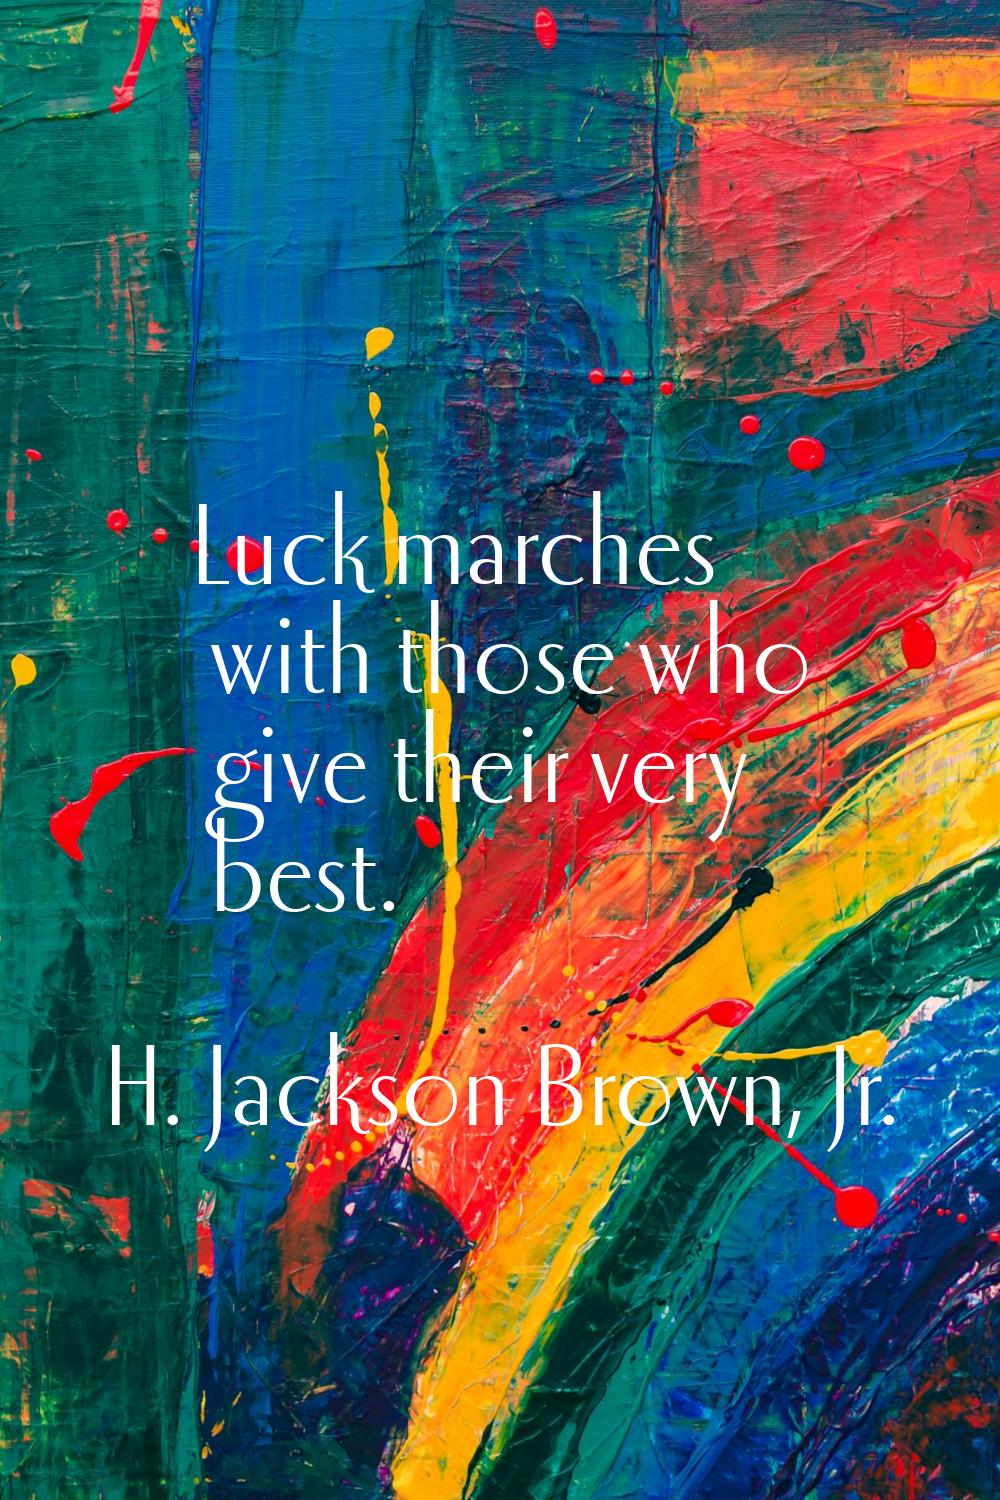 Luck marches with those who give their very best.